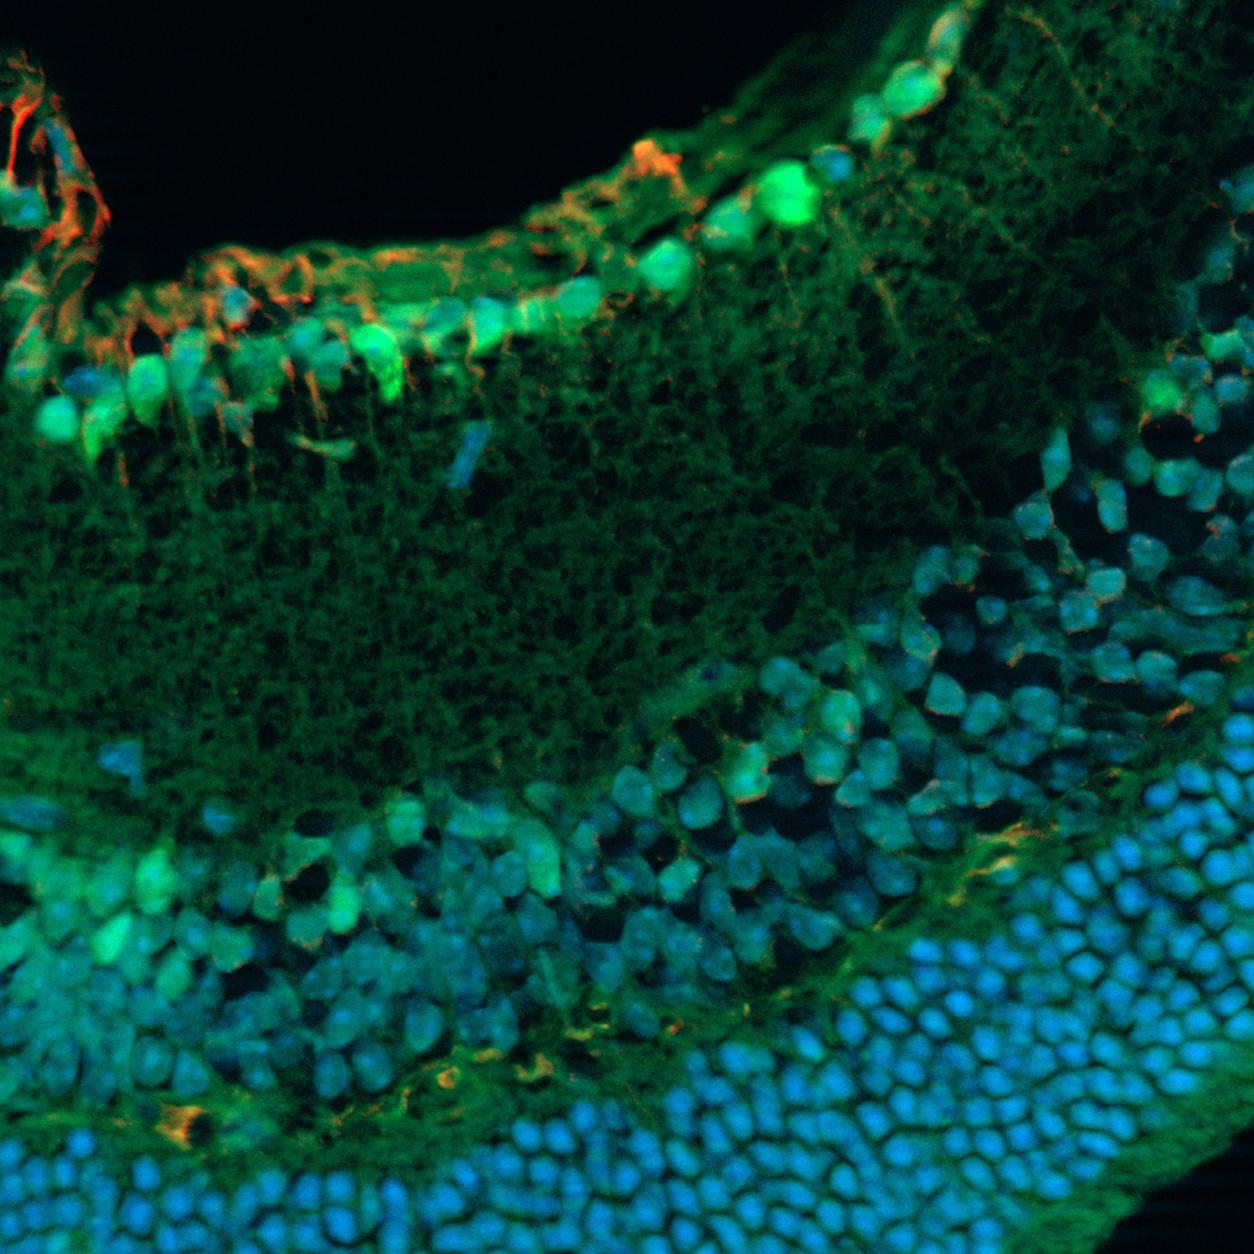 Fixed mouse retina section. Acquired with ZEISS Apotome.2. Specimen courtesy of S. Nan and P. Heiduschka, Department of Ophthalmology, University Medical Center Münster, Germany.